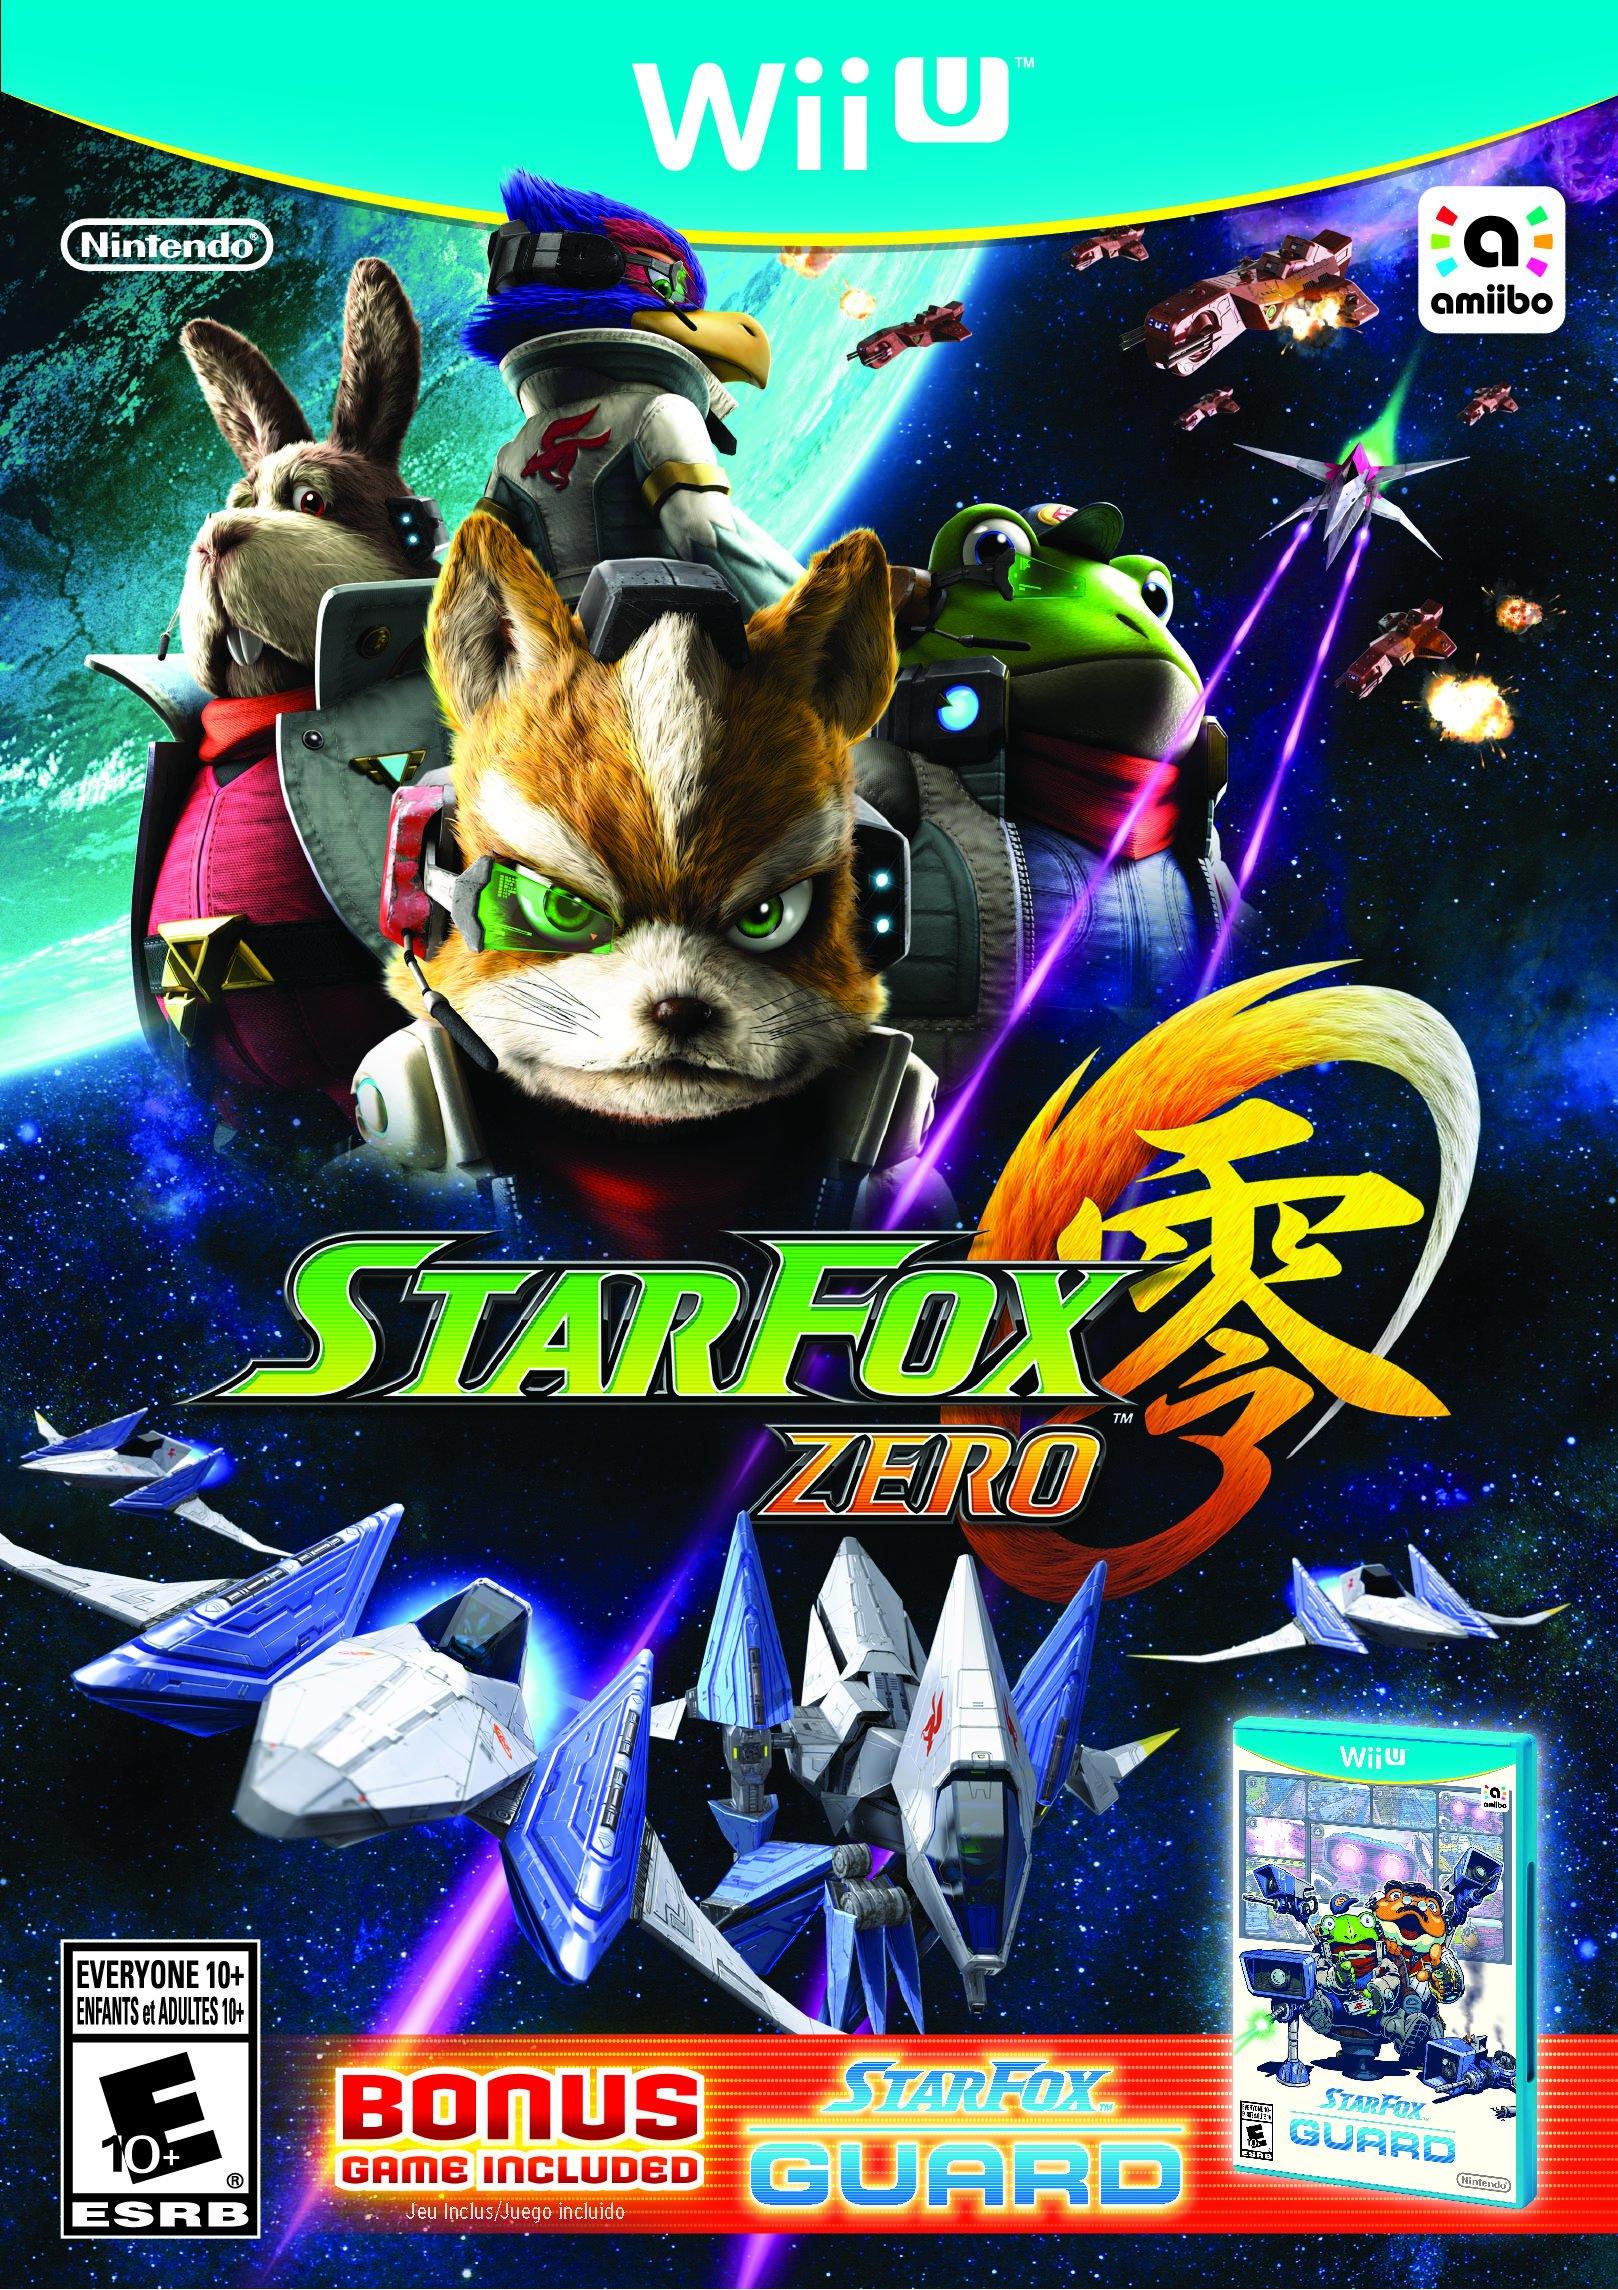 Nintendo Shows Off Star Fox Zero For Wii U With GamePad Aiming